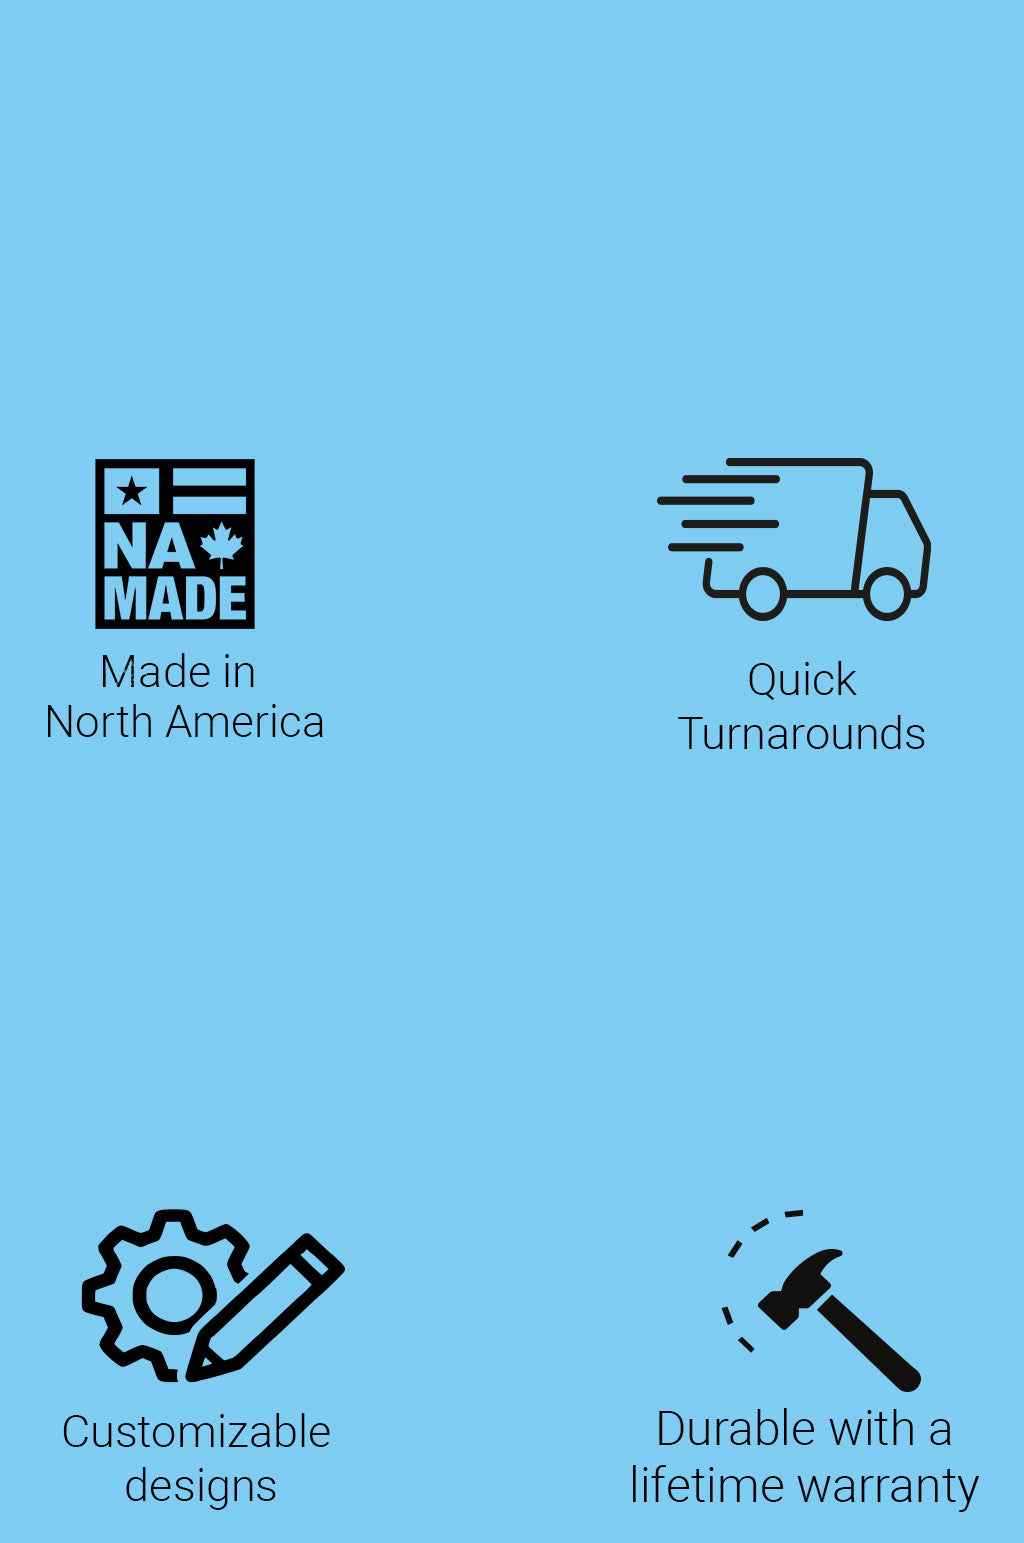 icons for custom design and warranty 